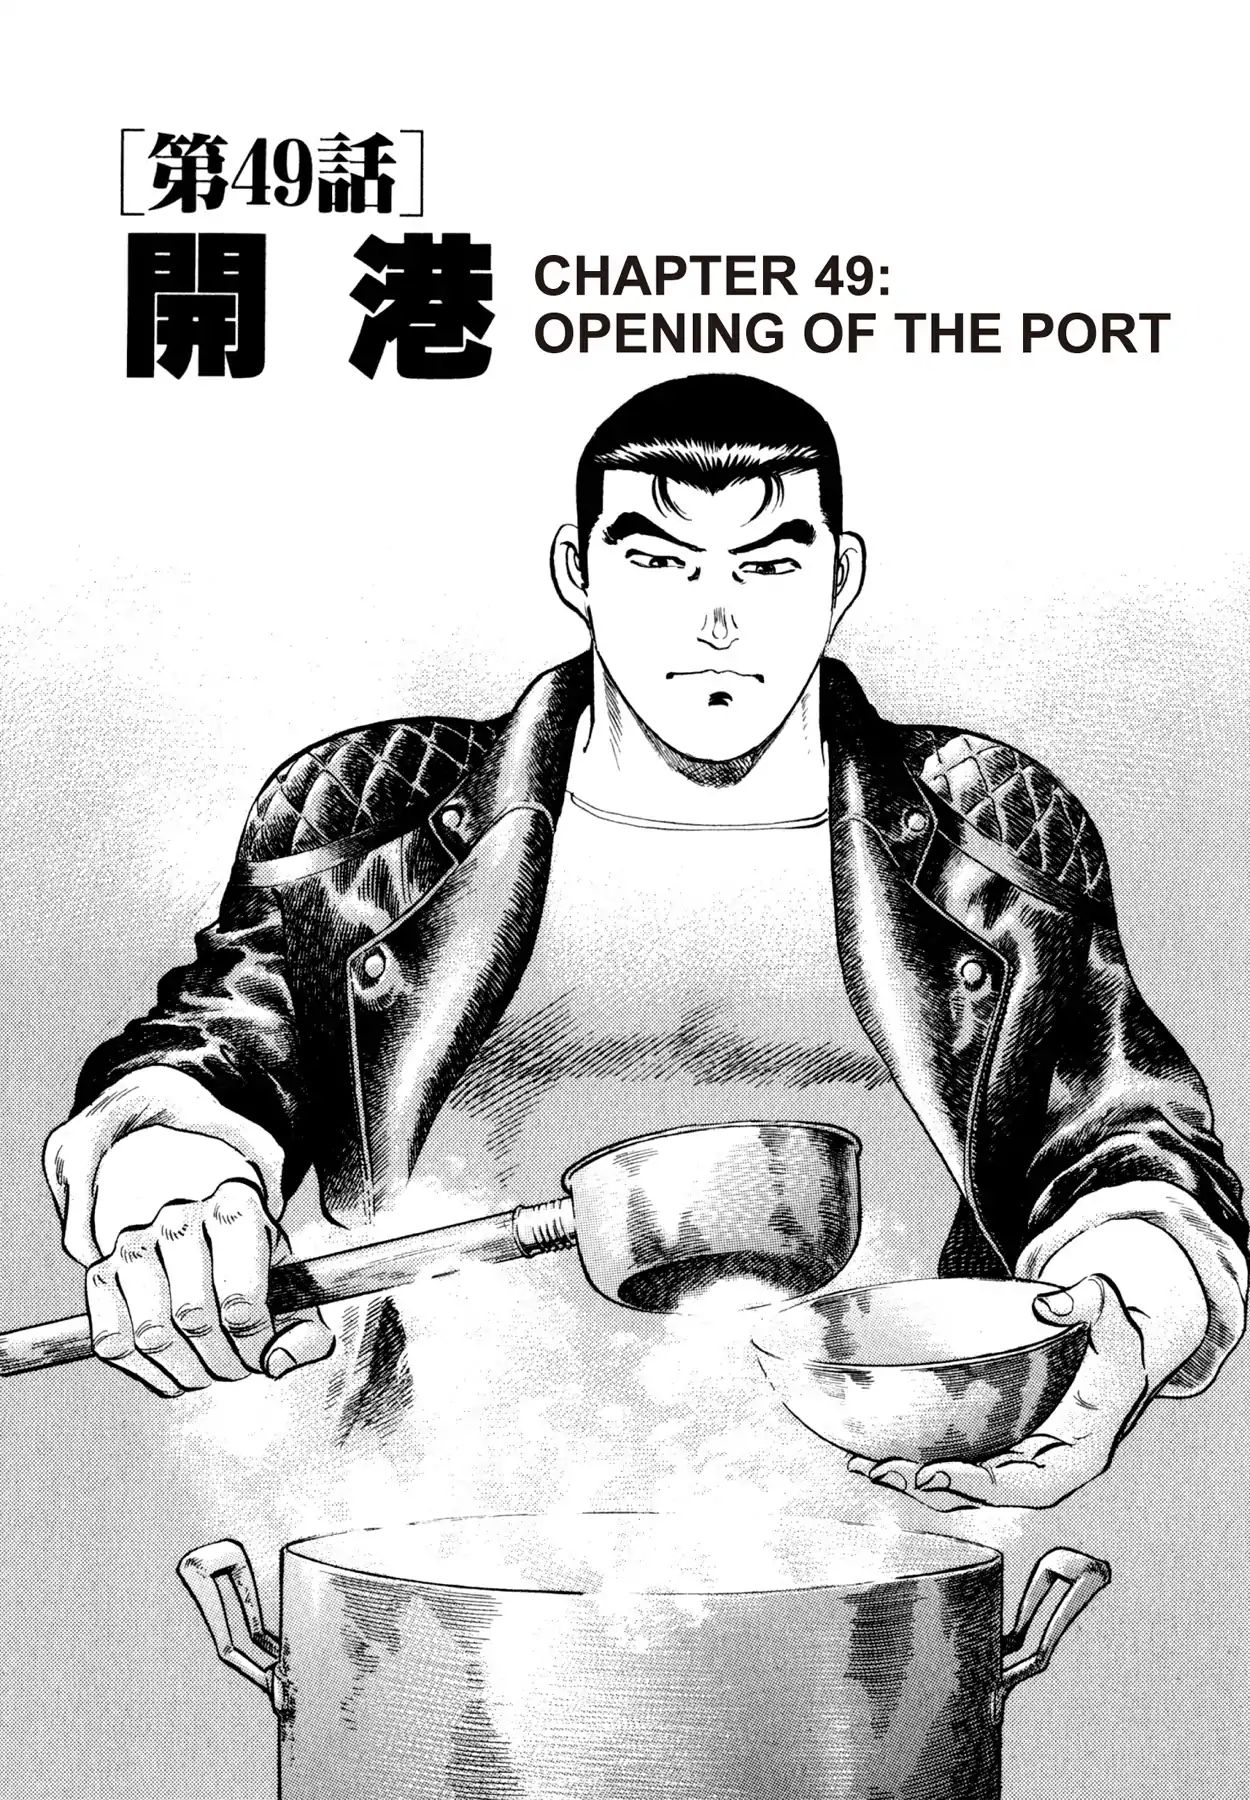 Shoku King VOL.6 CHAPTER 49: OPENING OF THE PORT